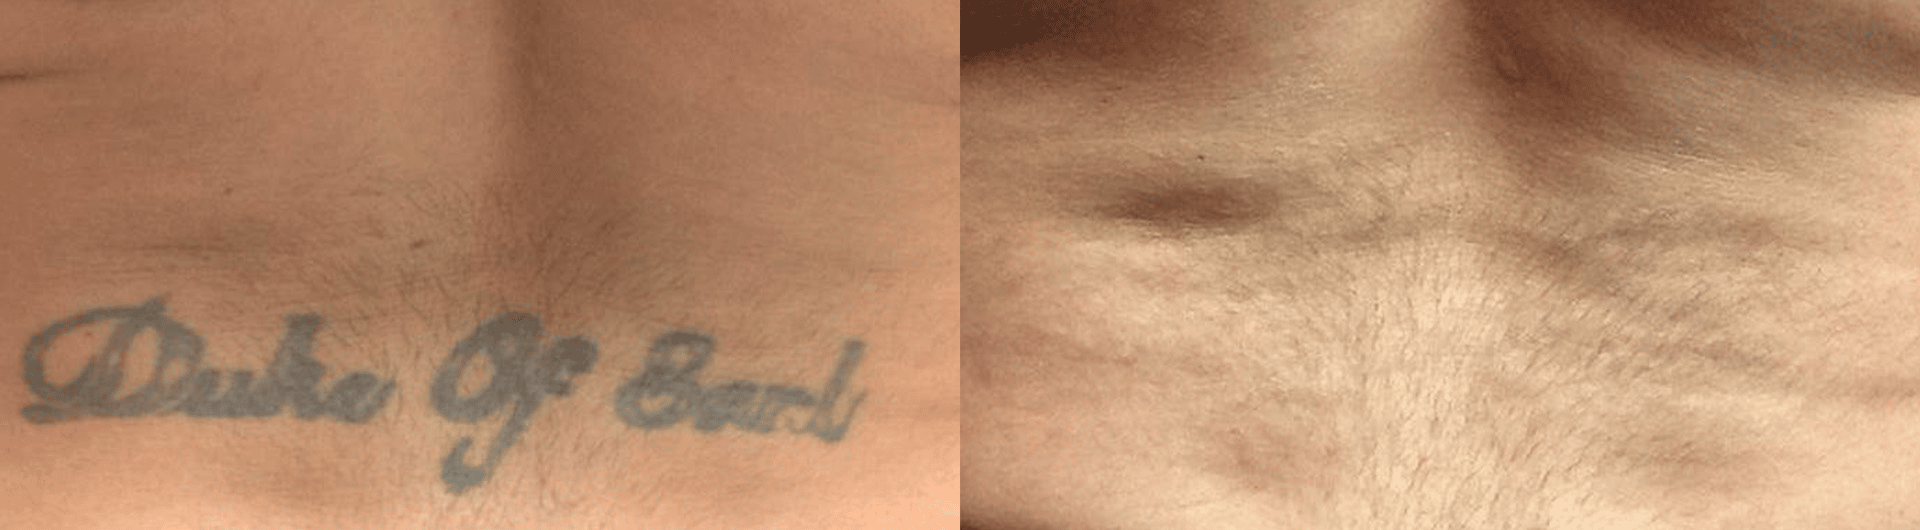 laser tattoo removal before and after 2